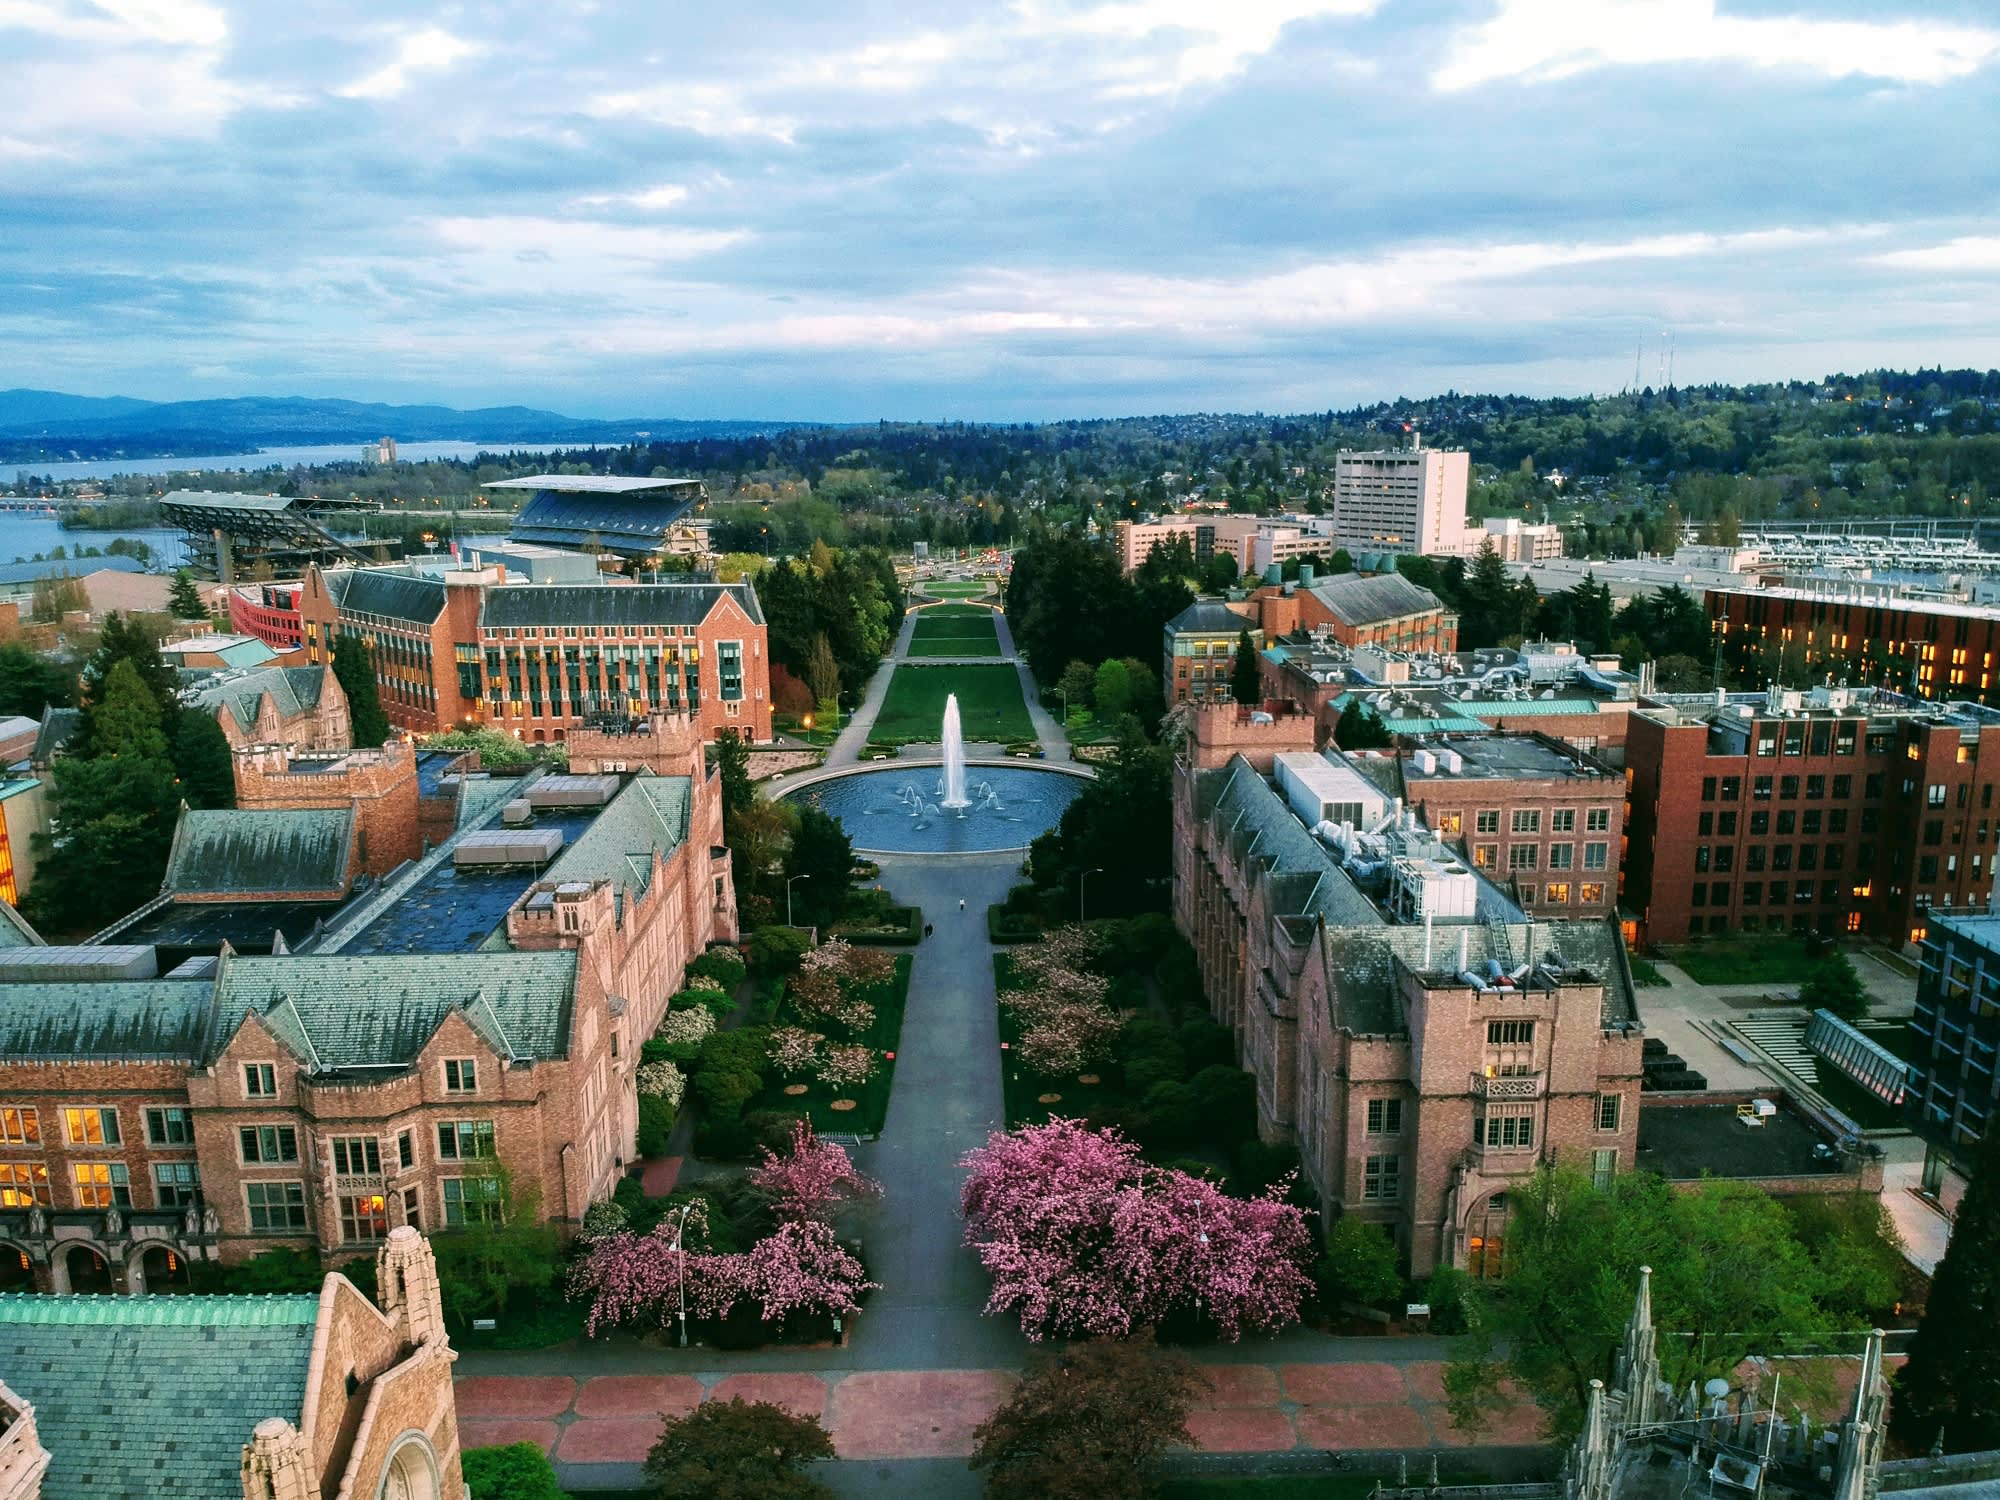 u-s-news-these-are-the-10-best-universities-in-the-world